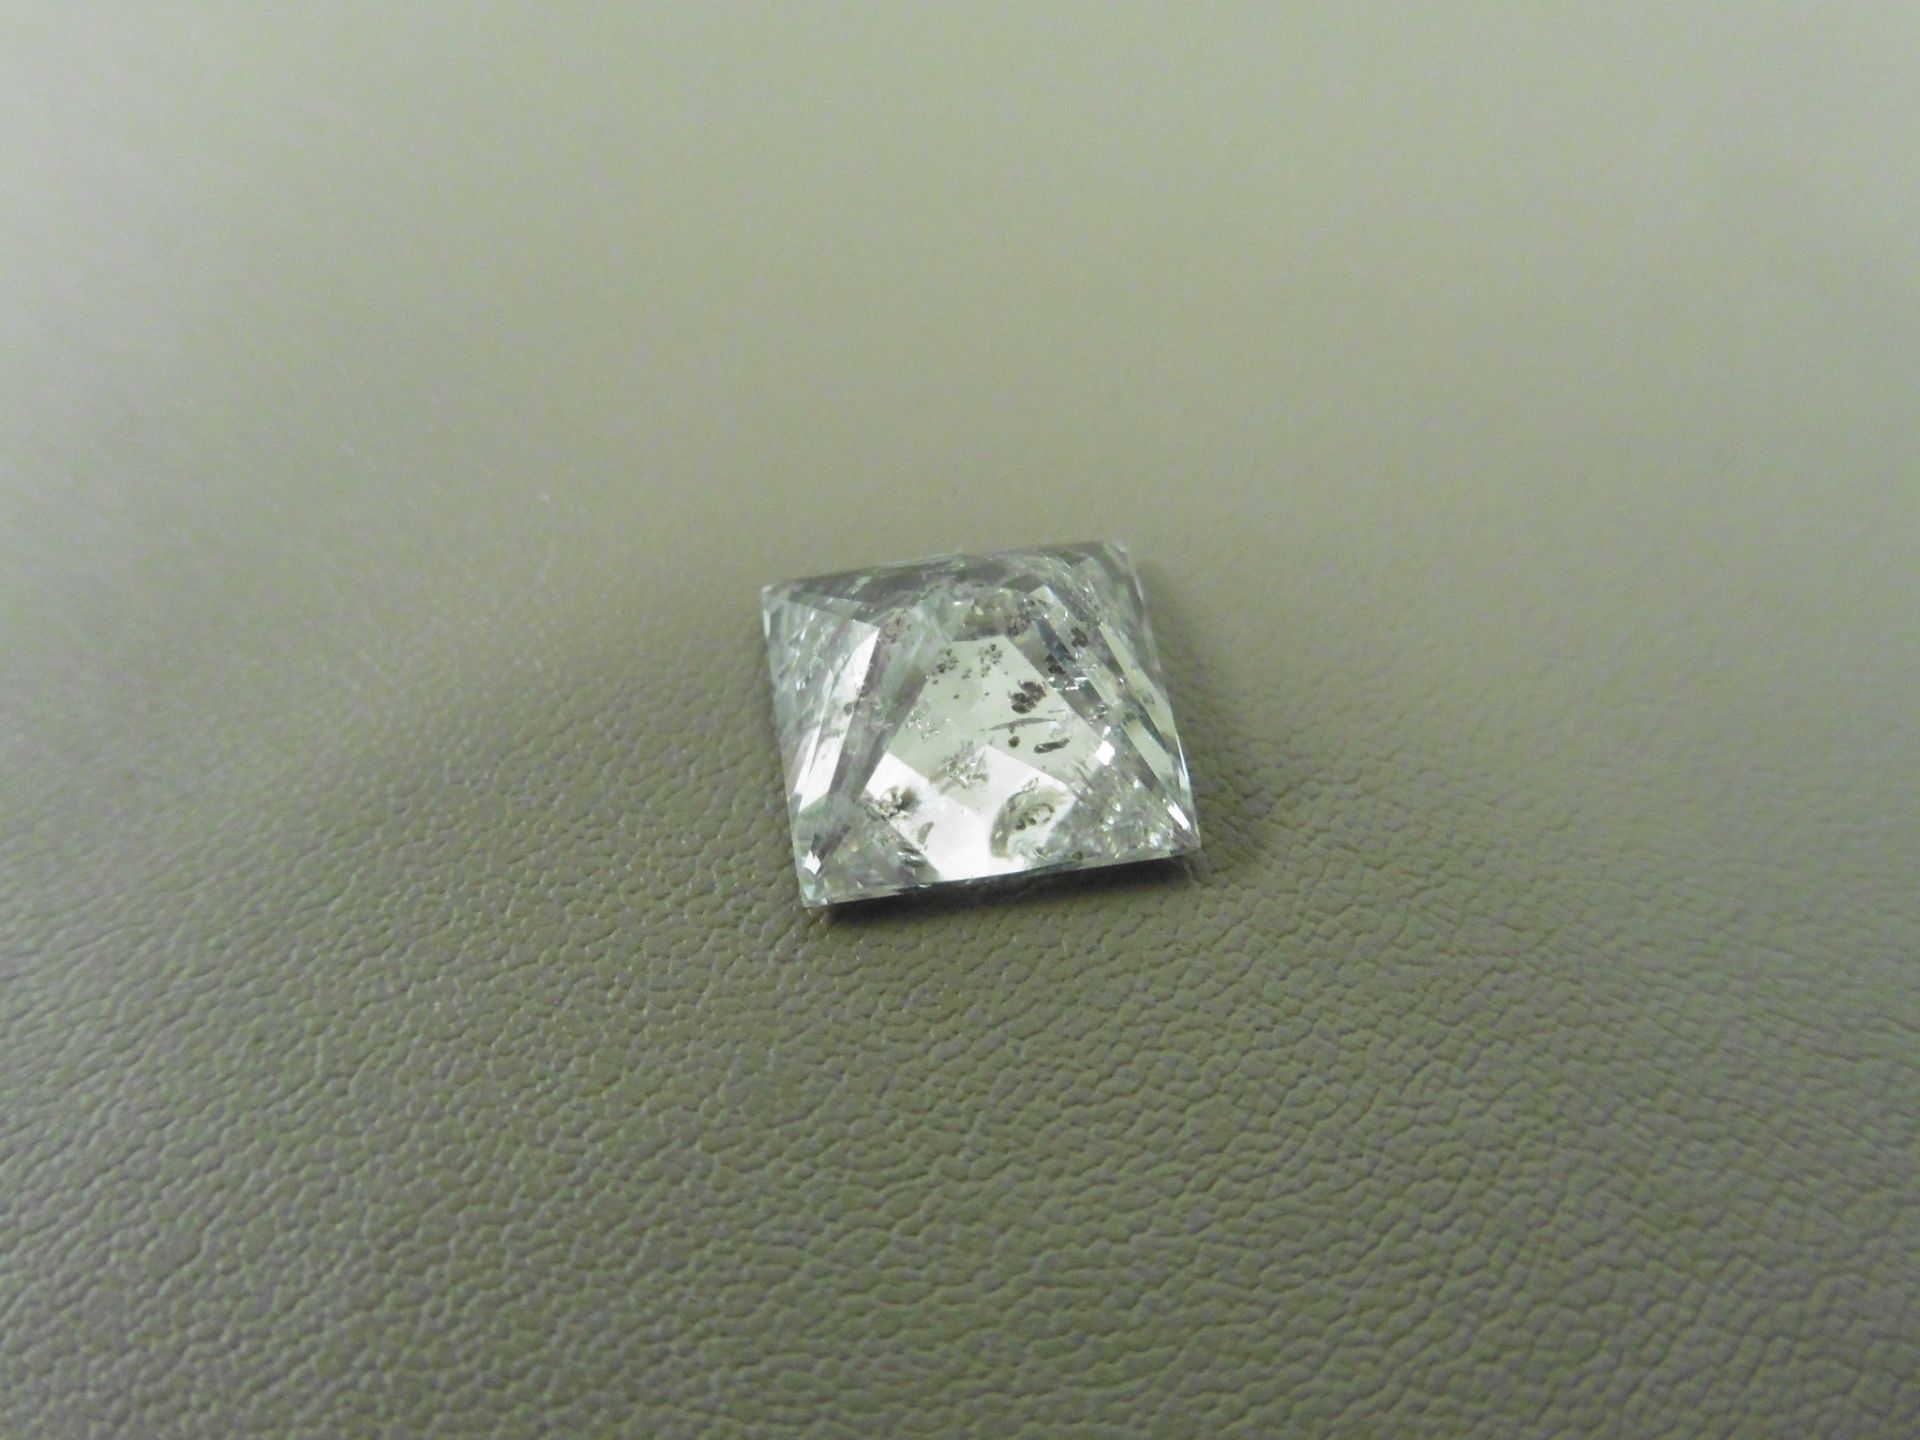 3.99ct natural loose princess cut diamond. F colour and I1clarity. EGL certification. Valued at £ - Image 4 of 5